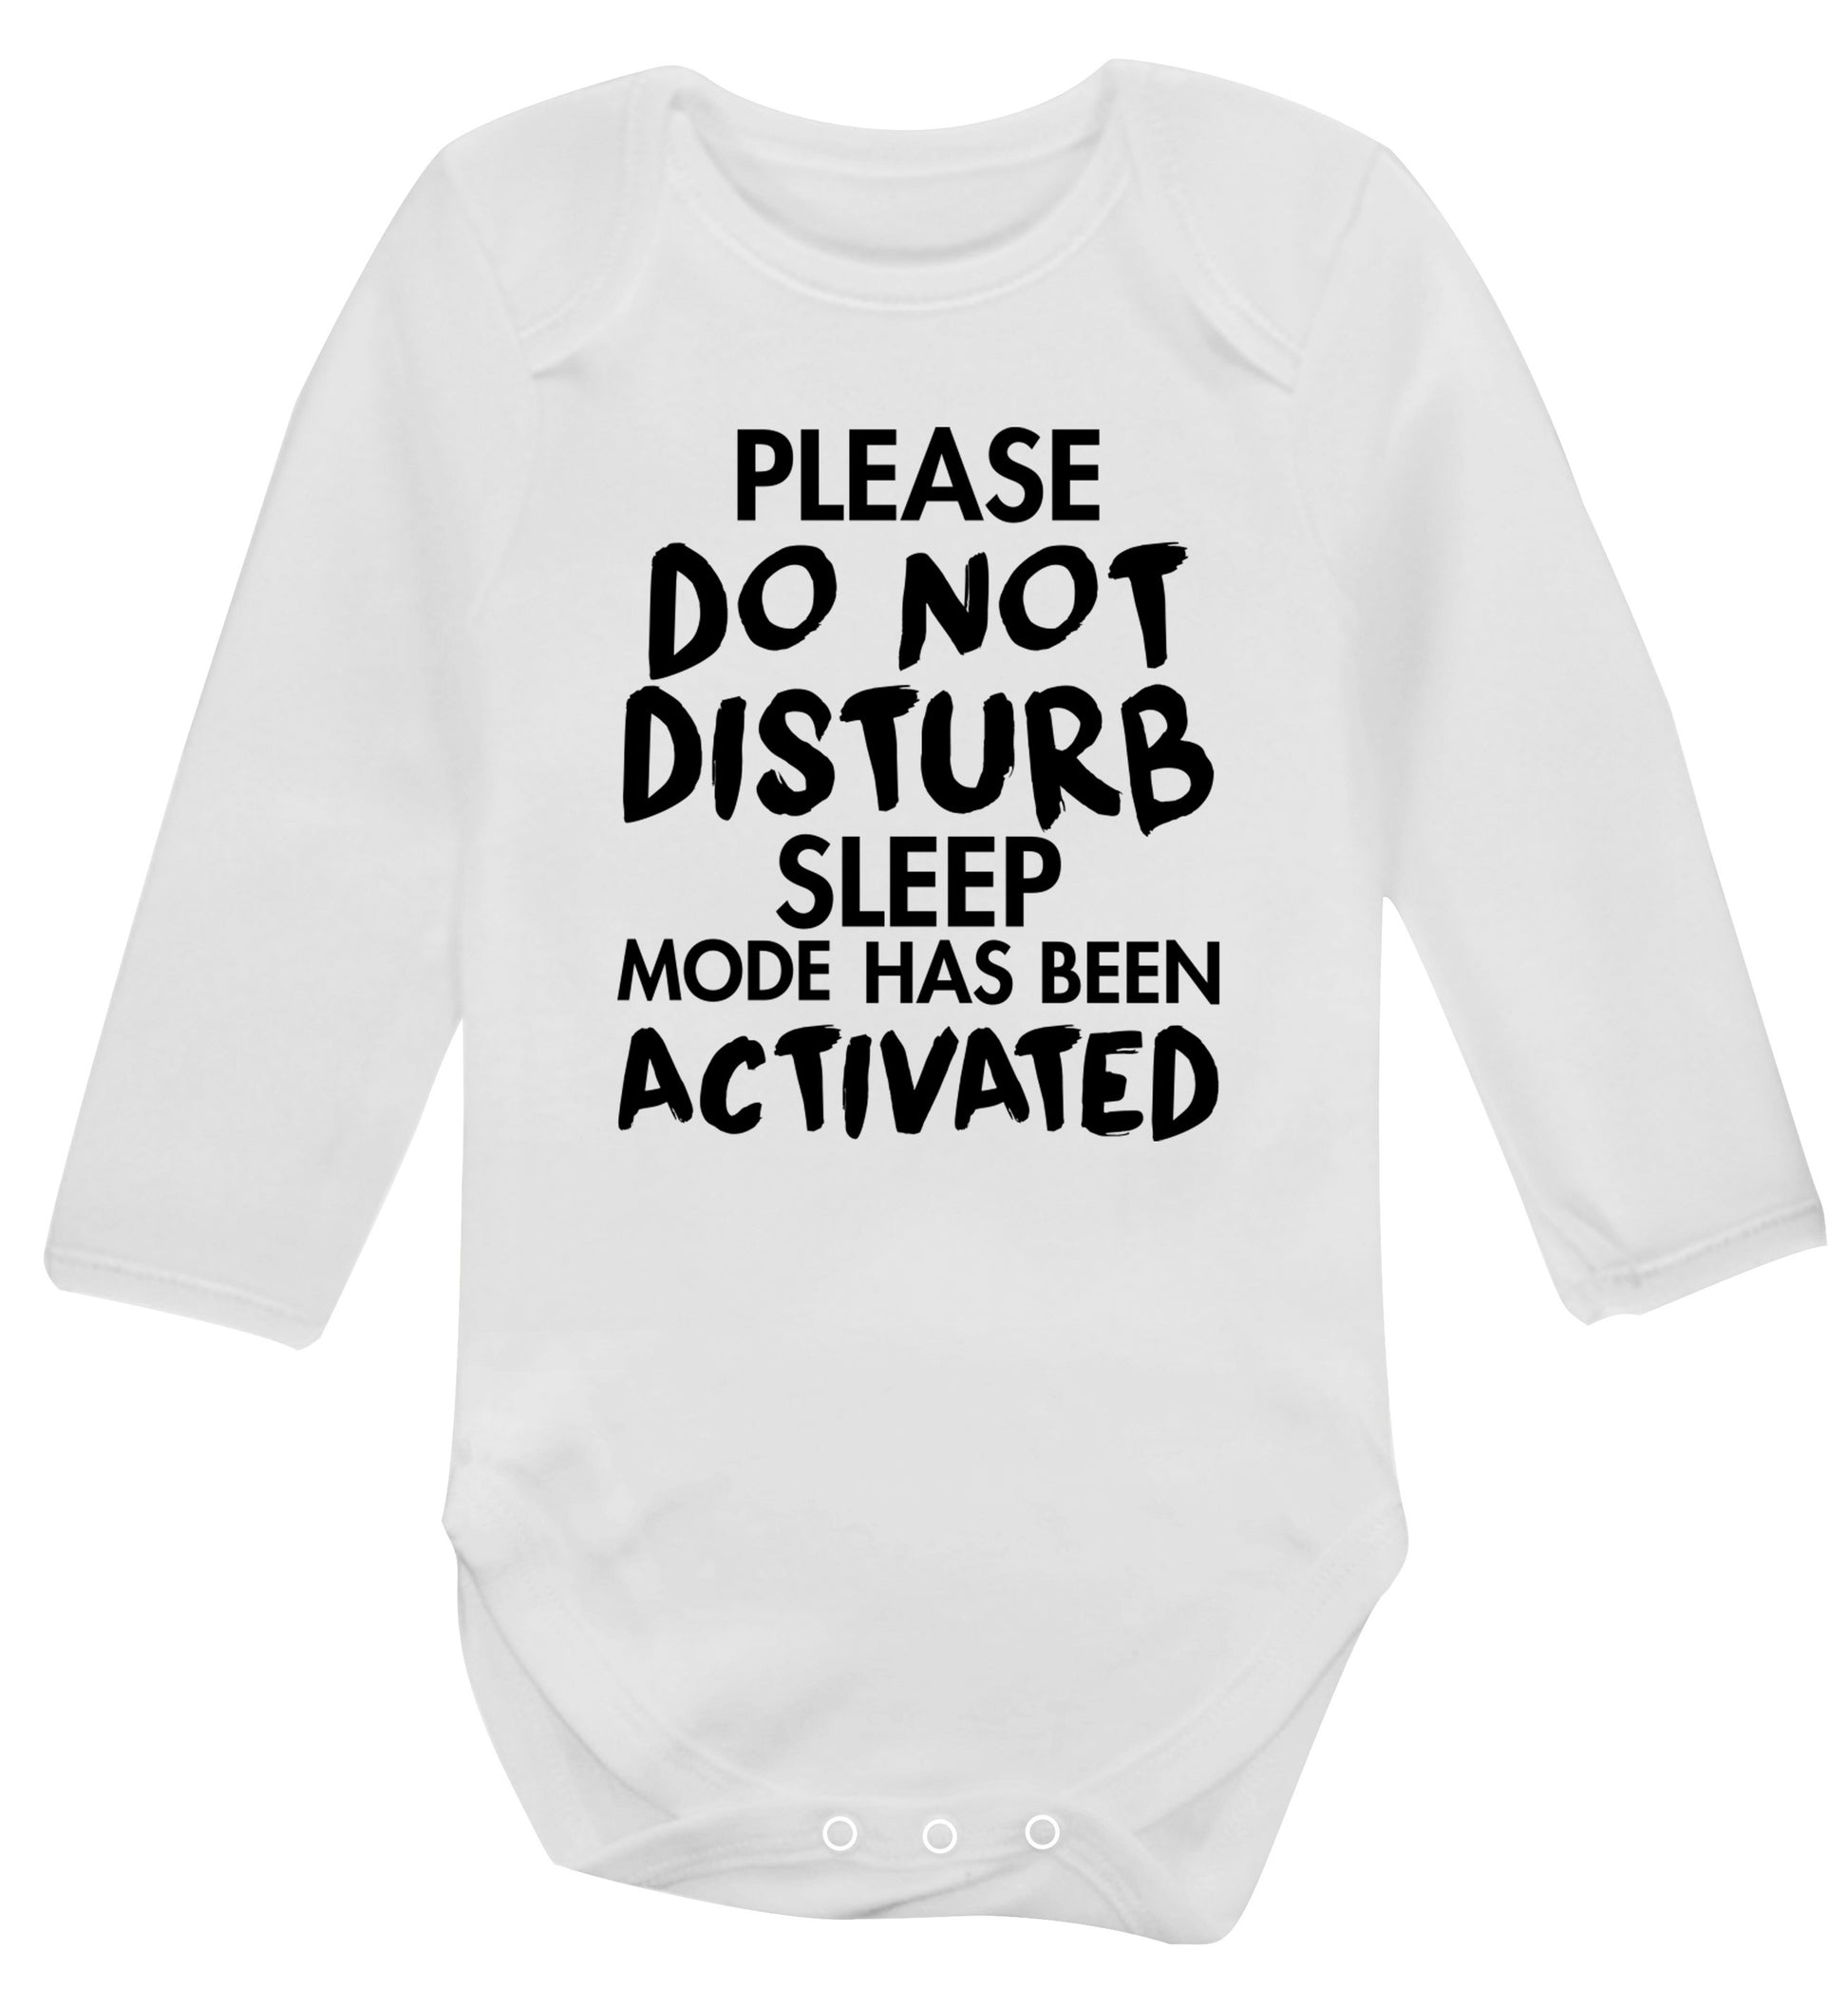 Please do not disturb sleeping mode has been activated Baby Vest long sleeved white 6-12 months